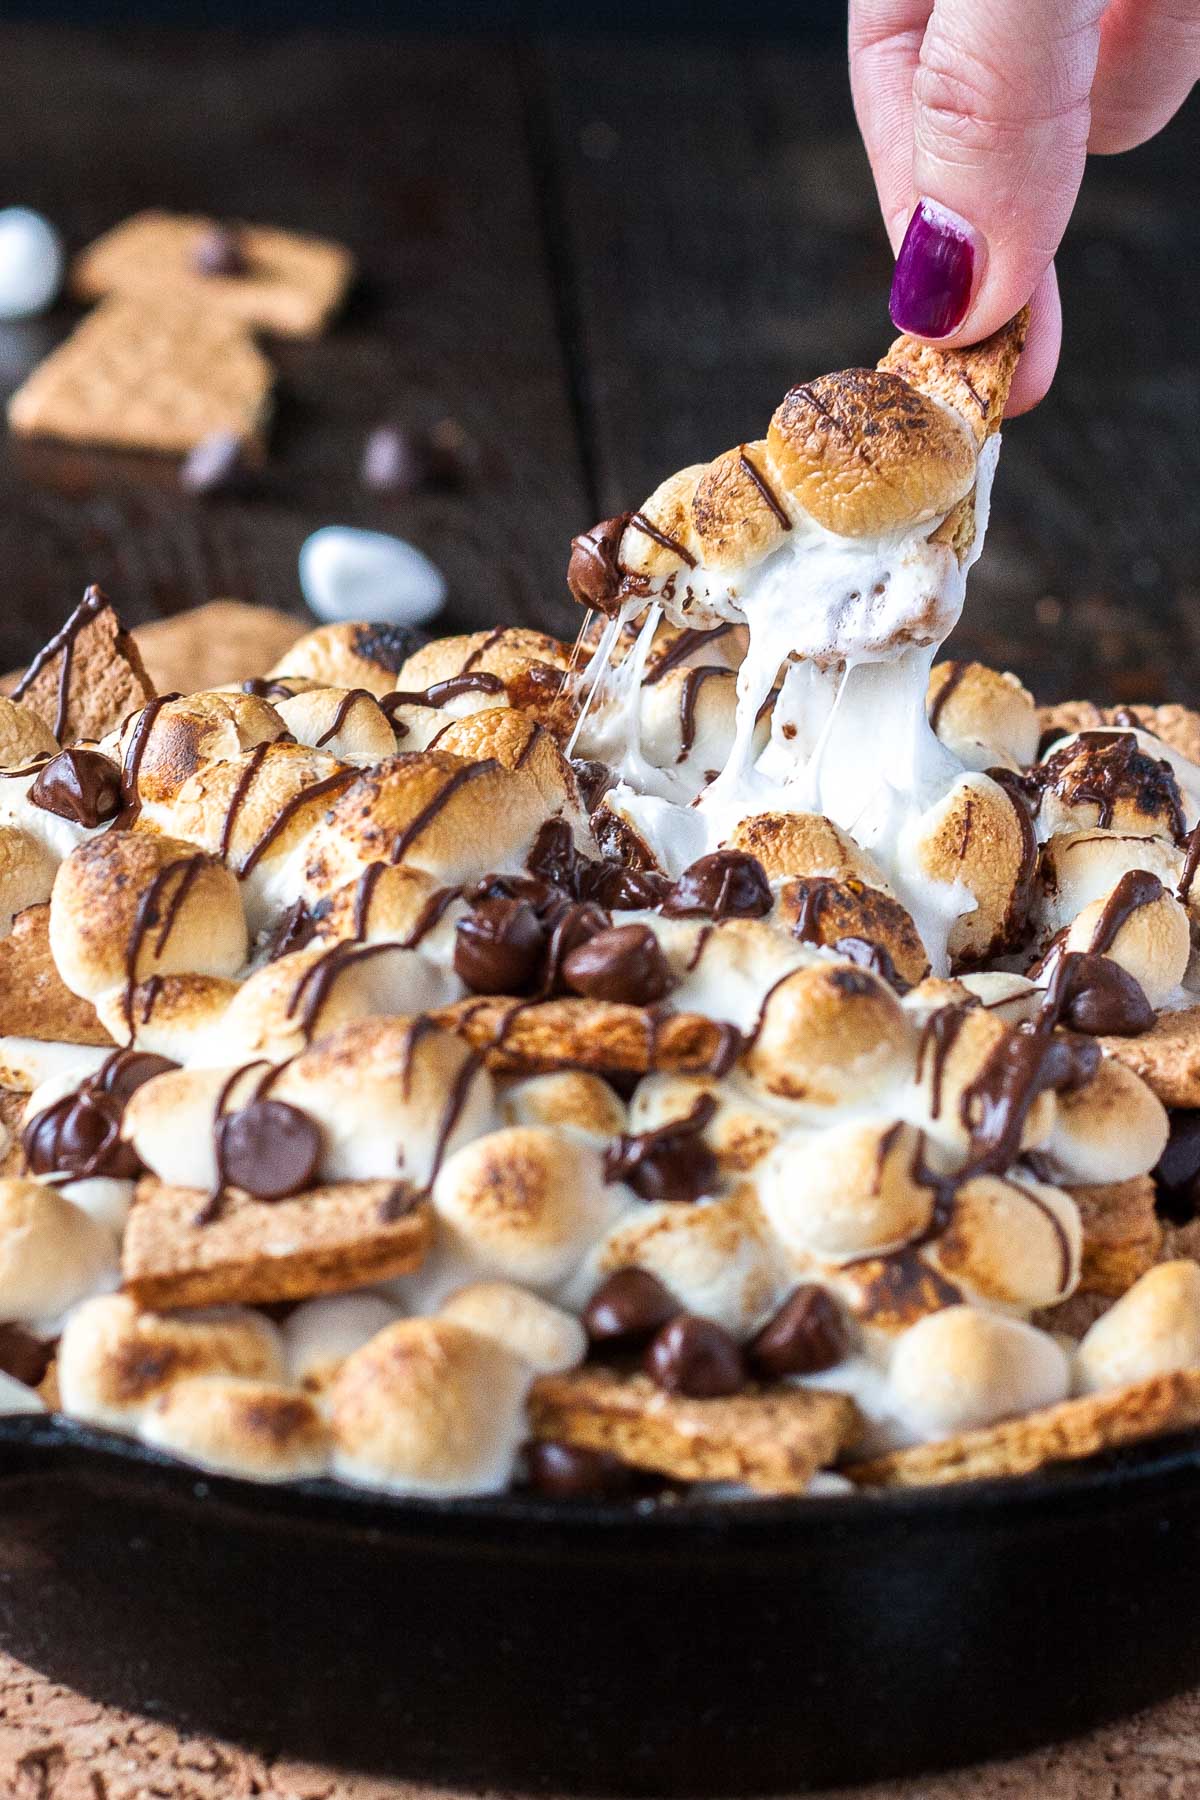 These 50 S'mores Desserts That Will Have Everyone Singing Kumbaya